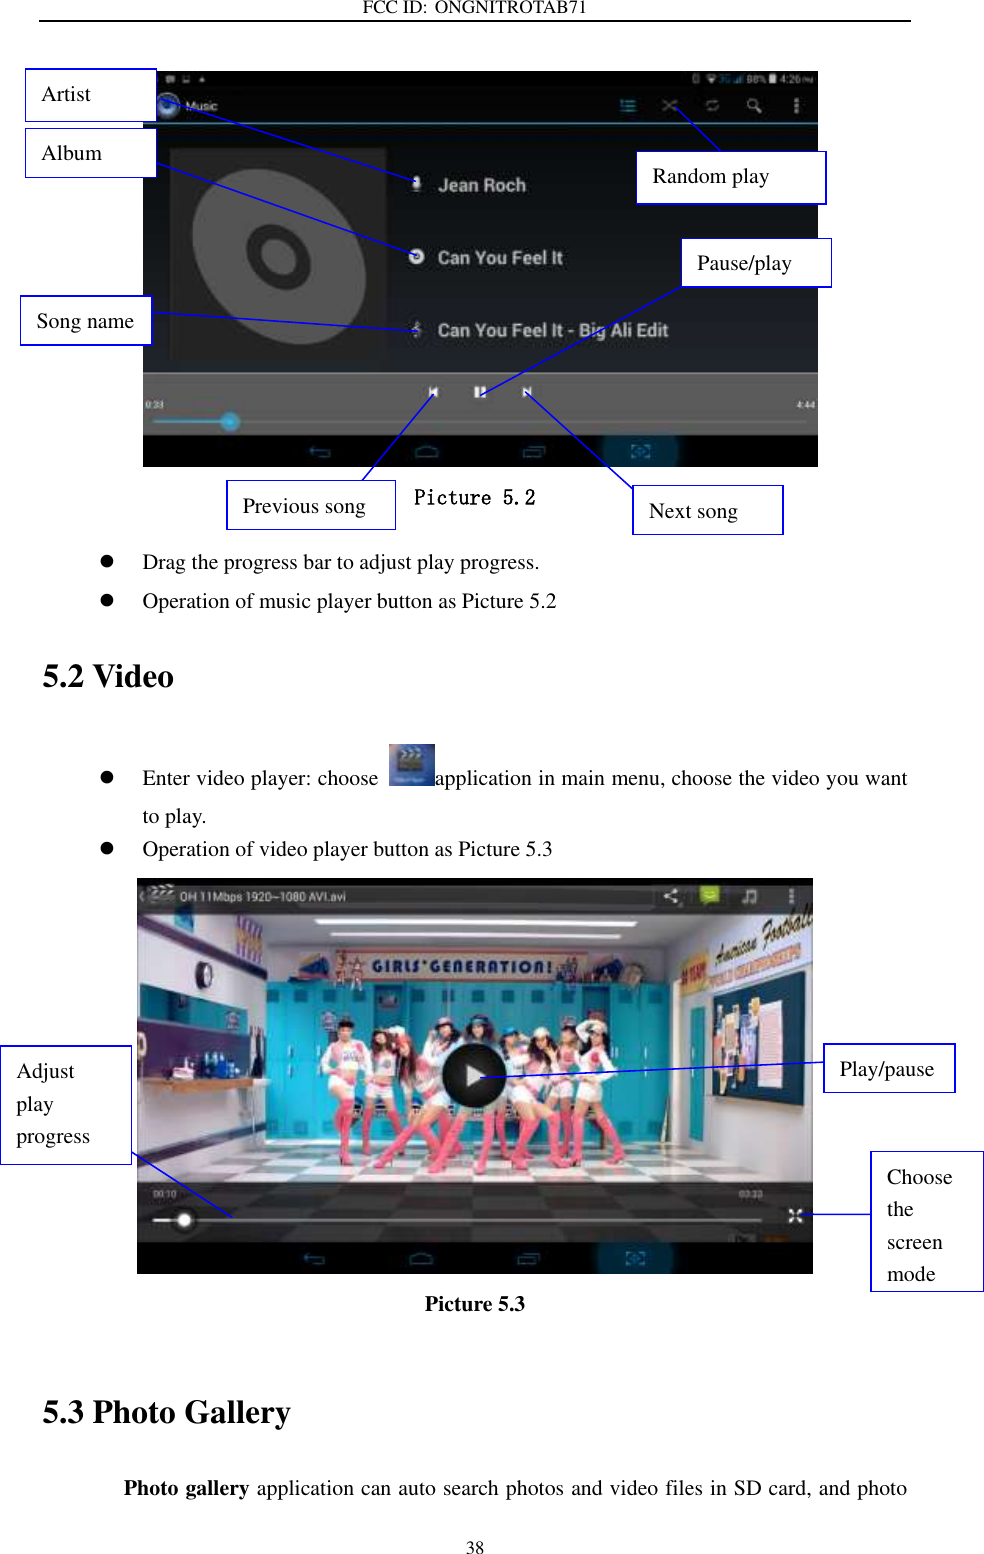 FCC ID: ONGNITROTAB71   38    Picture 5.2   Drag the progress bar to adjust play progress.  Operation of music player button as Picture 5.2 5.2 Video  Enter video player: choose  application in main menu, choose the video you want to play.        Operation of video player button as Picture 5.3  Picture 5.3  5.3 Photo Gallery Photo gallery application can auto search photos and video files in SD card, and photo Artist  Pause/play Next song Previous song Song name  Album  Random play Choose the screen mode Adjust play progress Play/pause 